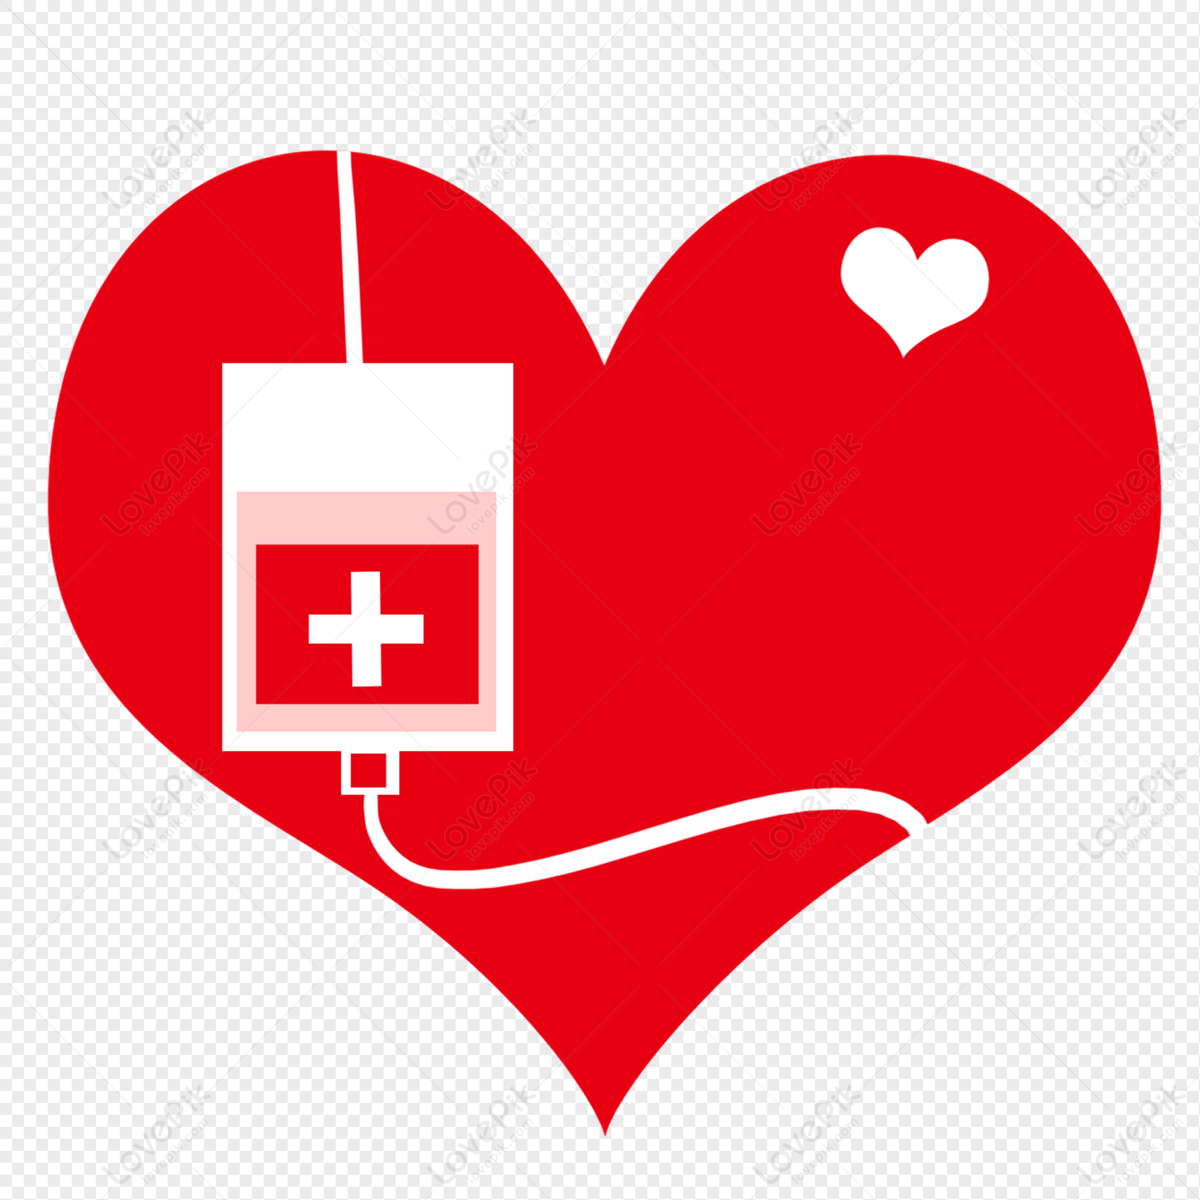 Blood Donation Free PNG And Clipart Image For Free Download - Lovepik |  401327239